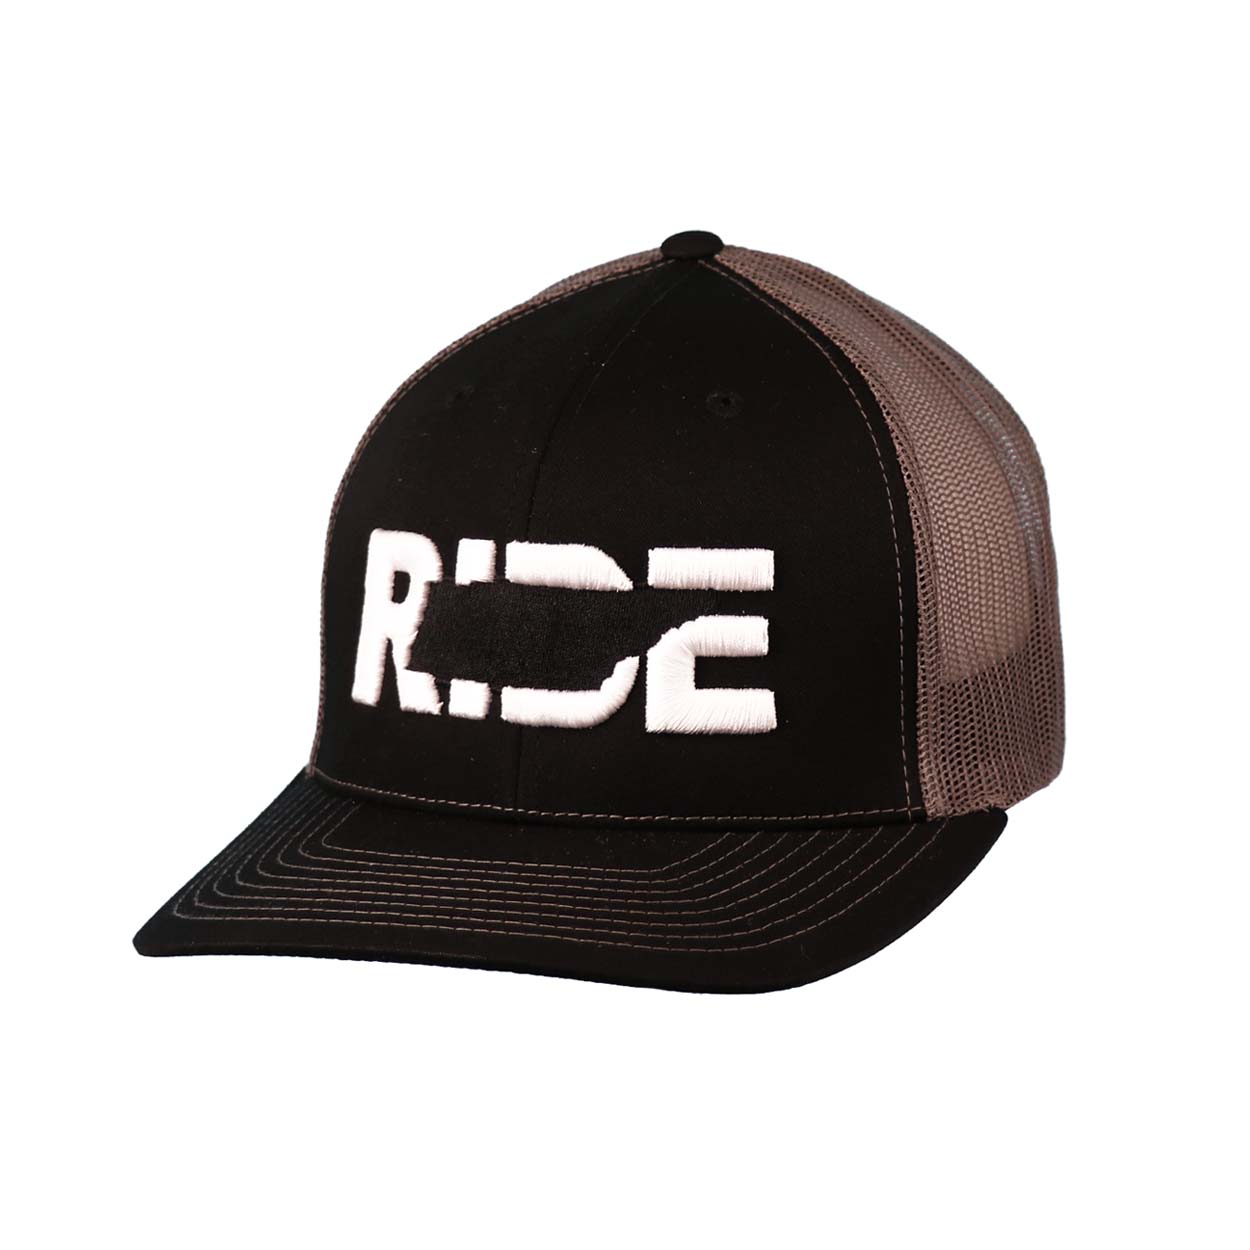 Ride Tennessee Classic Embroidered Snapback Trucker Hat Black/Charcoal